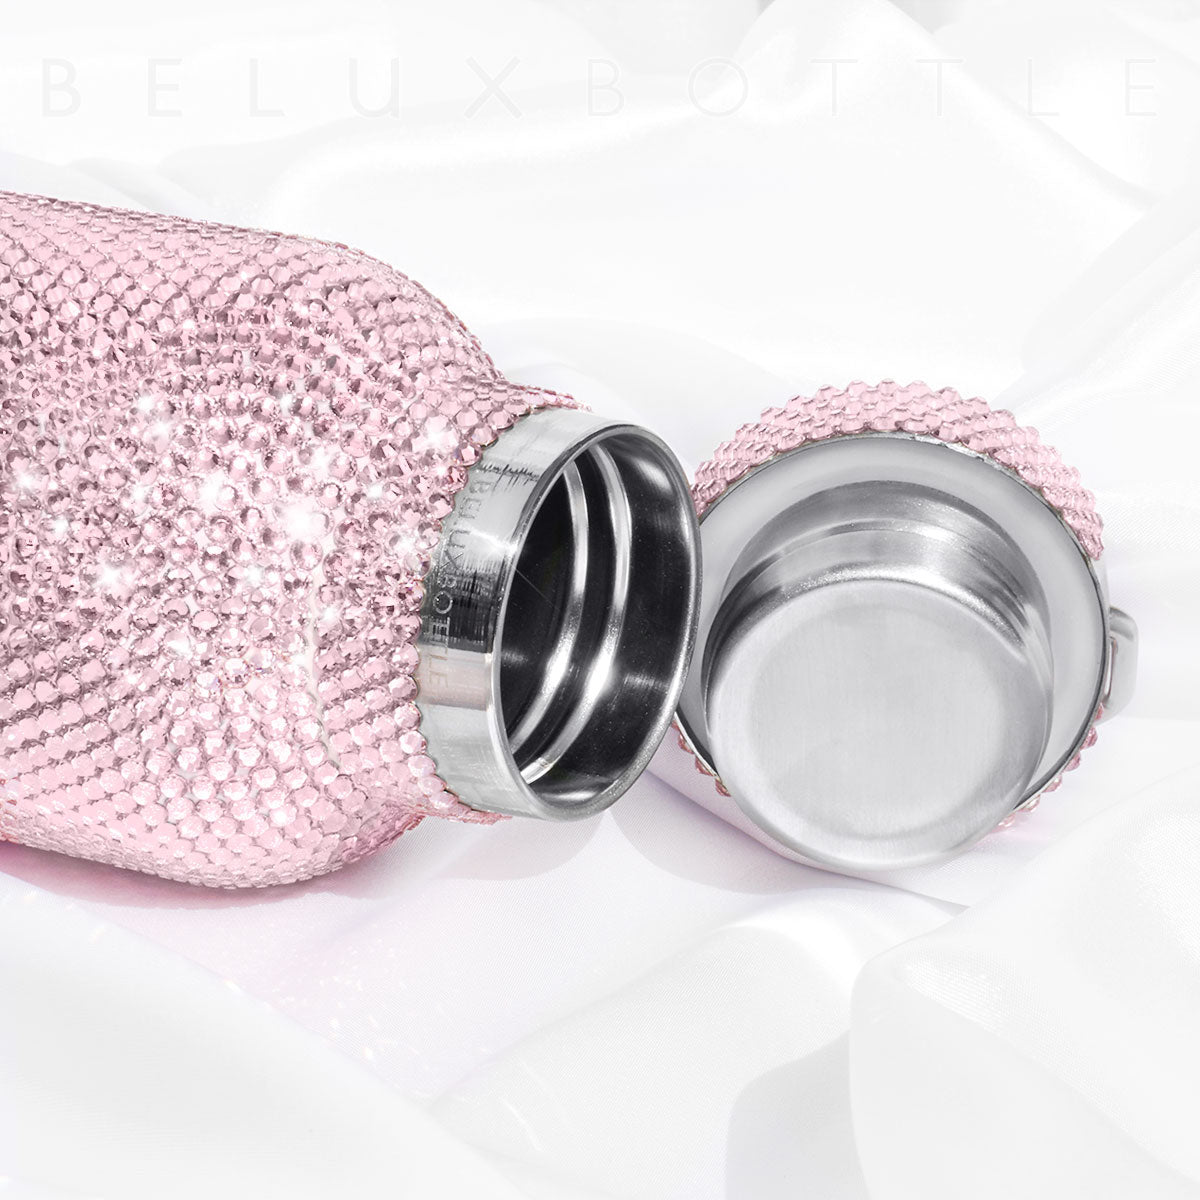 Close-up of Pink Bling Rhinestone Water Bottle Neck with Stainless Steel Blinged-Out Bottle Cap